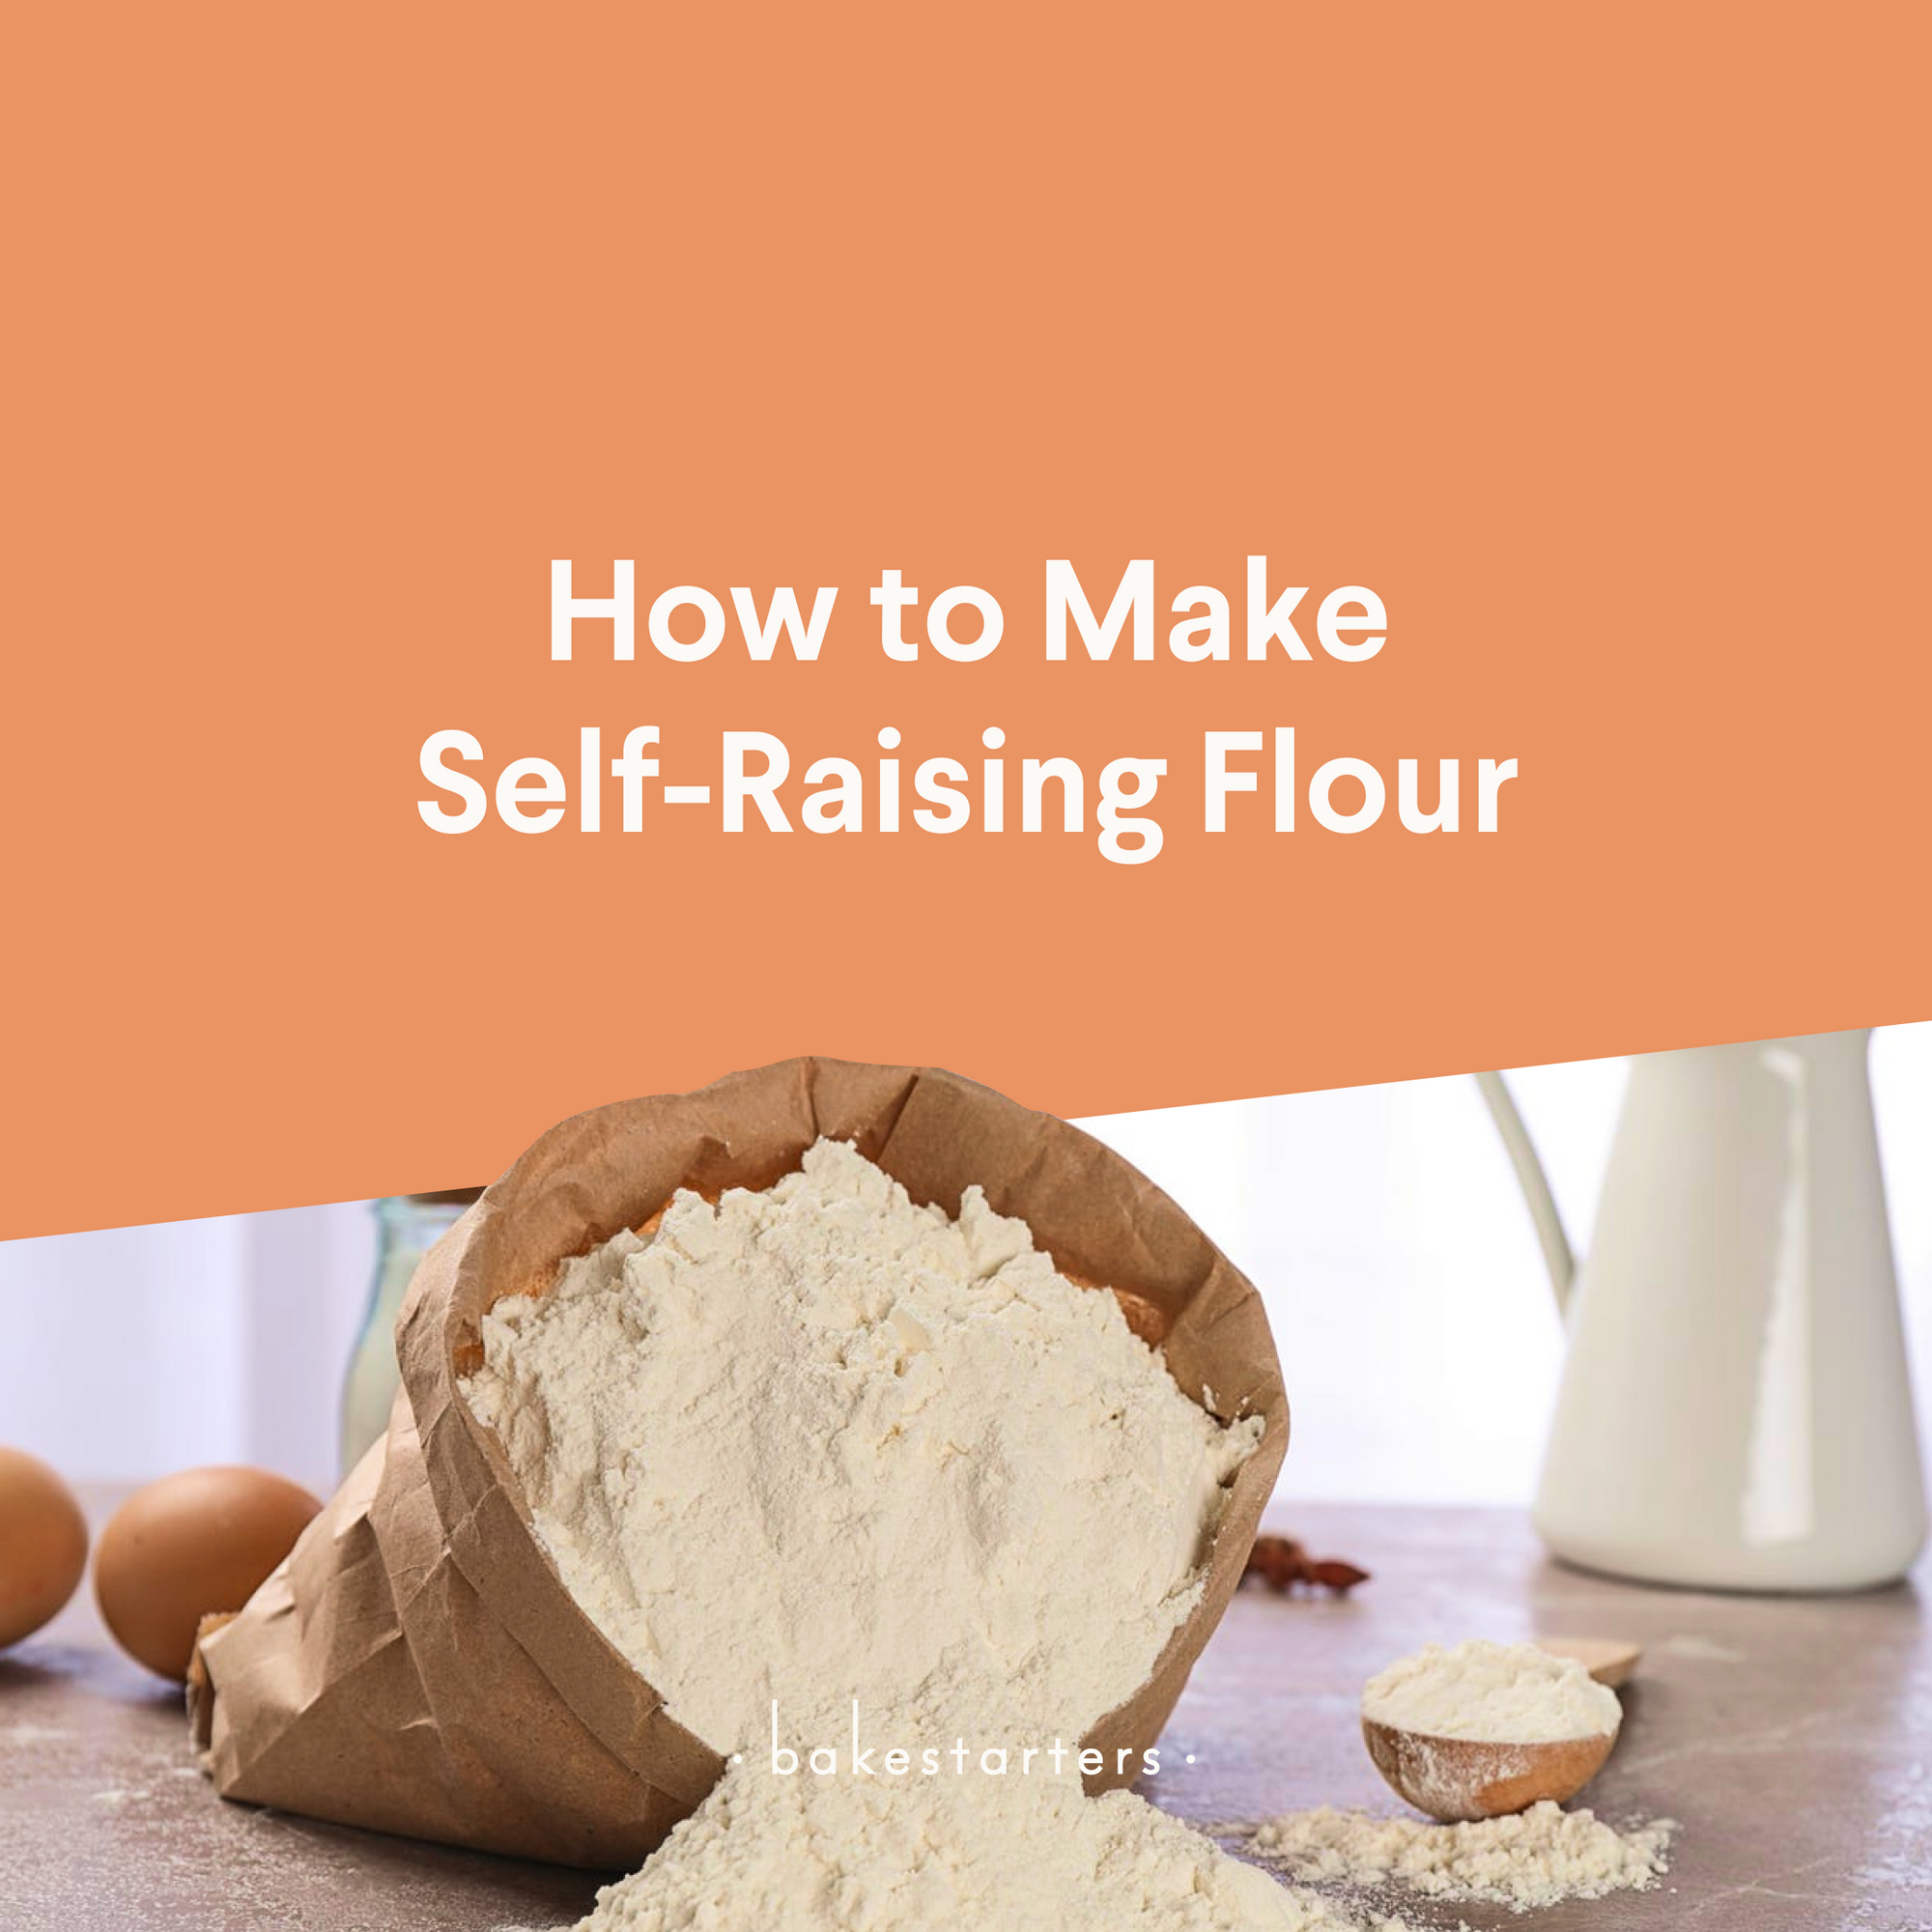 In A Pinch? This Is How To Make Self-Raising Flour With Plain Flour, Salt, And Baking Powder